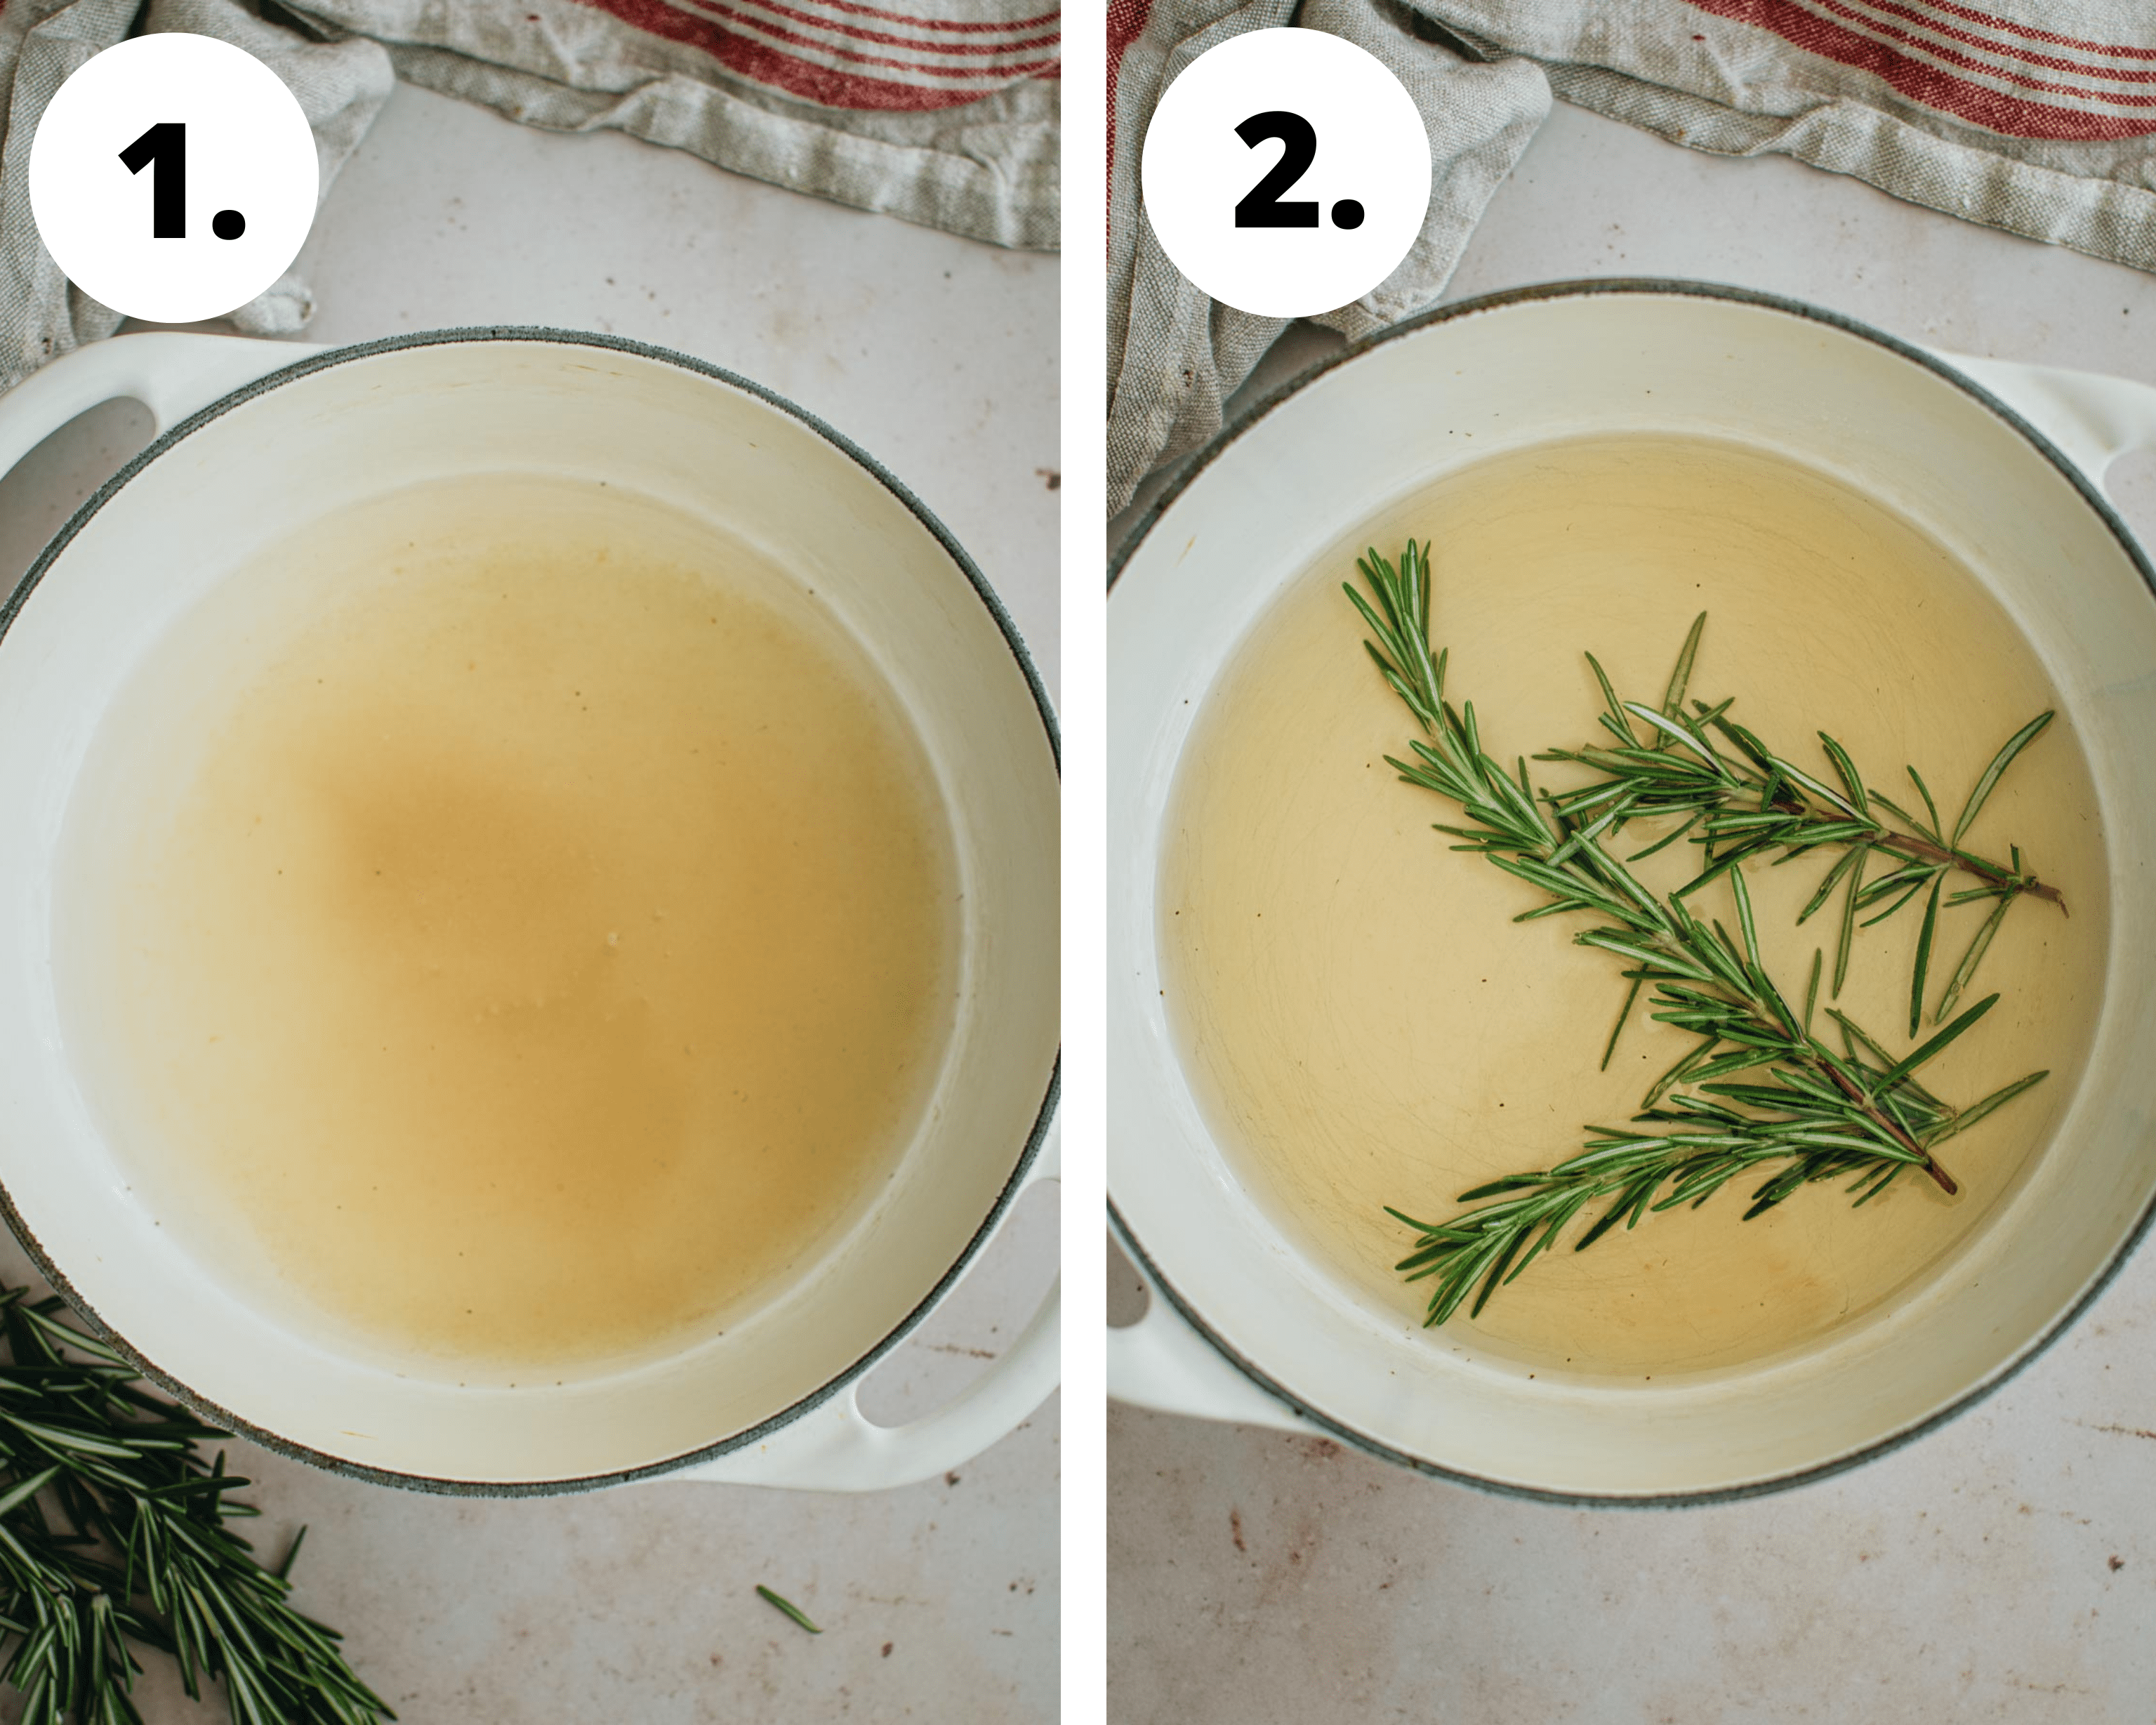 How to make rosemary simple syrup steps 1 and 2.